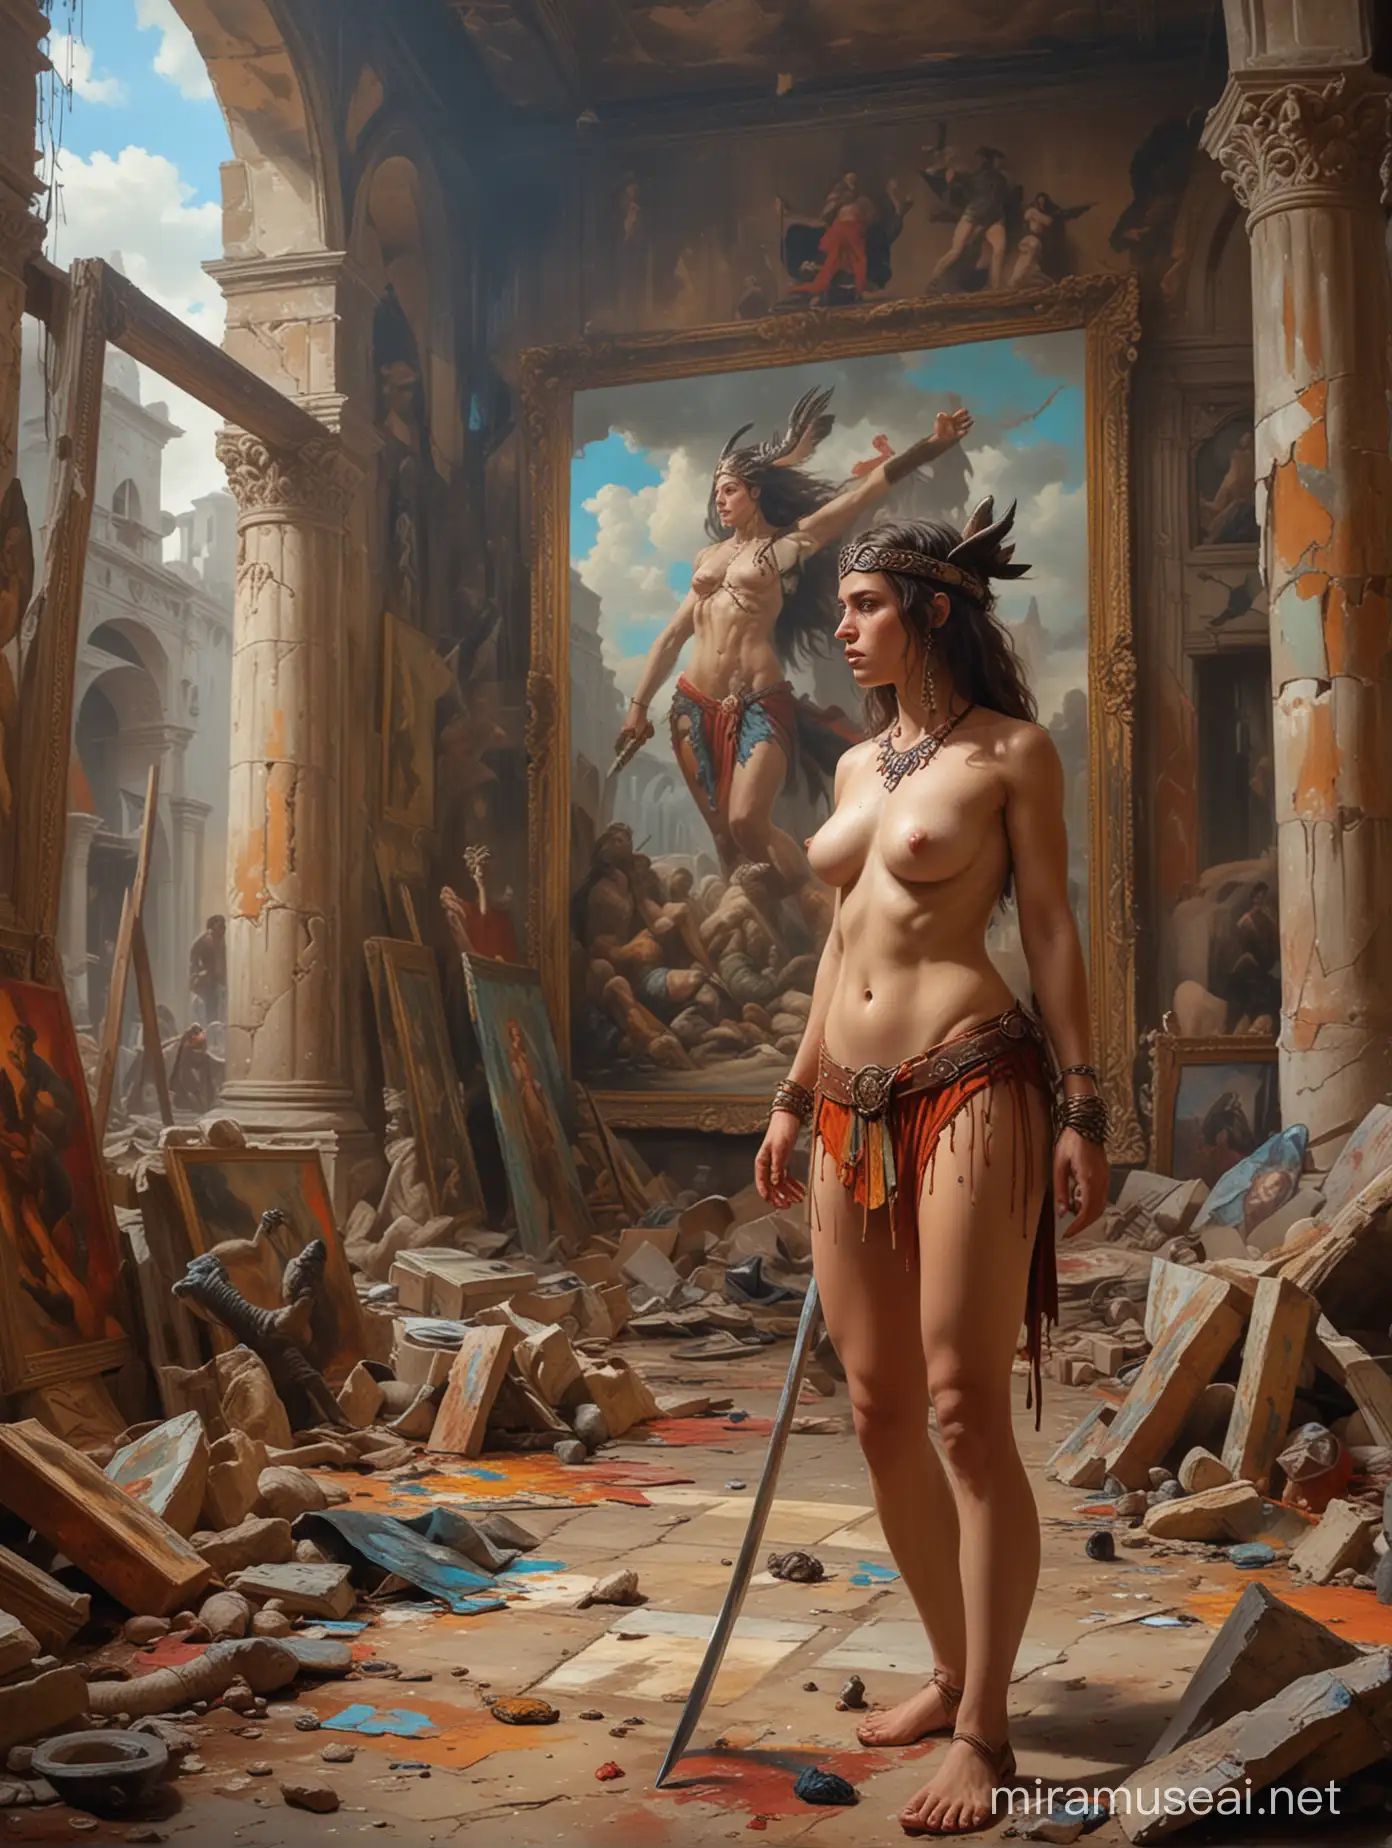 Barbarian Warrior Among Surreal Ruins in an Art Gallery